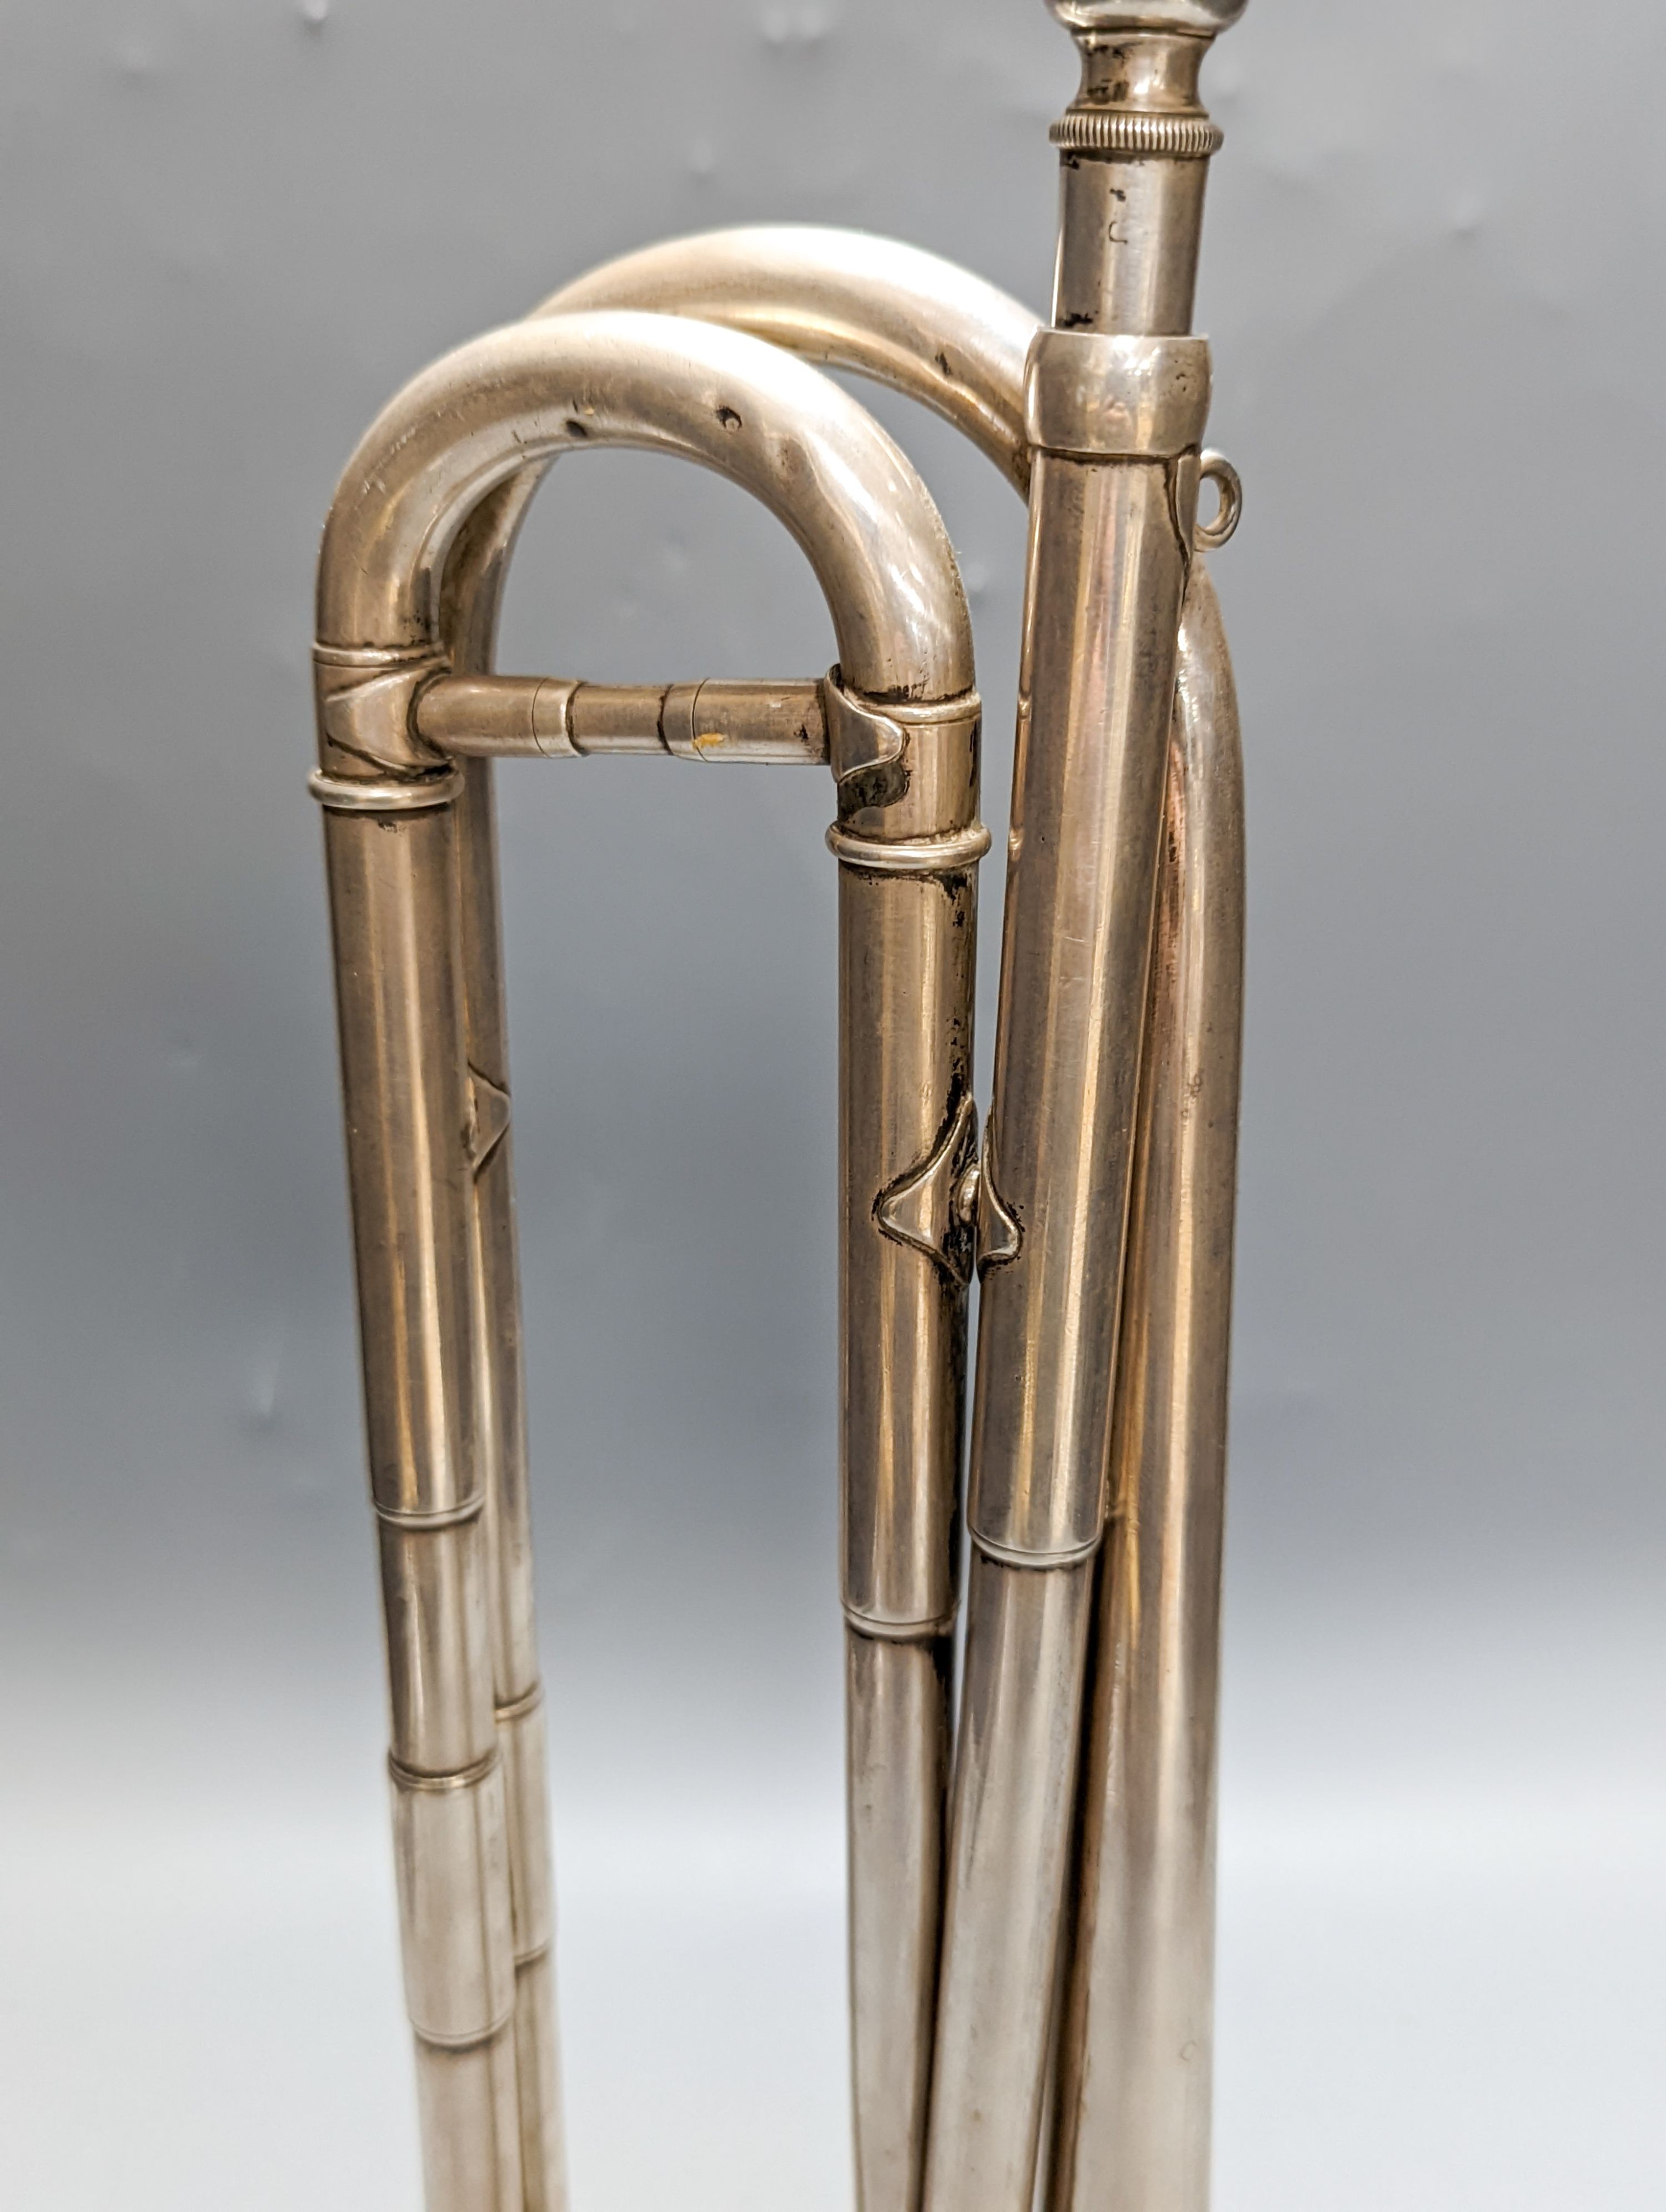 A Rudall Carte & Co manufacturers 23 Berners Street Oxford Street London No.4084 military bugle or cavalry trumpet, 43cm